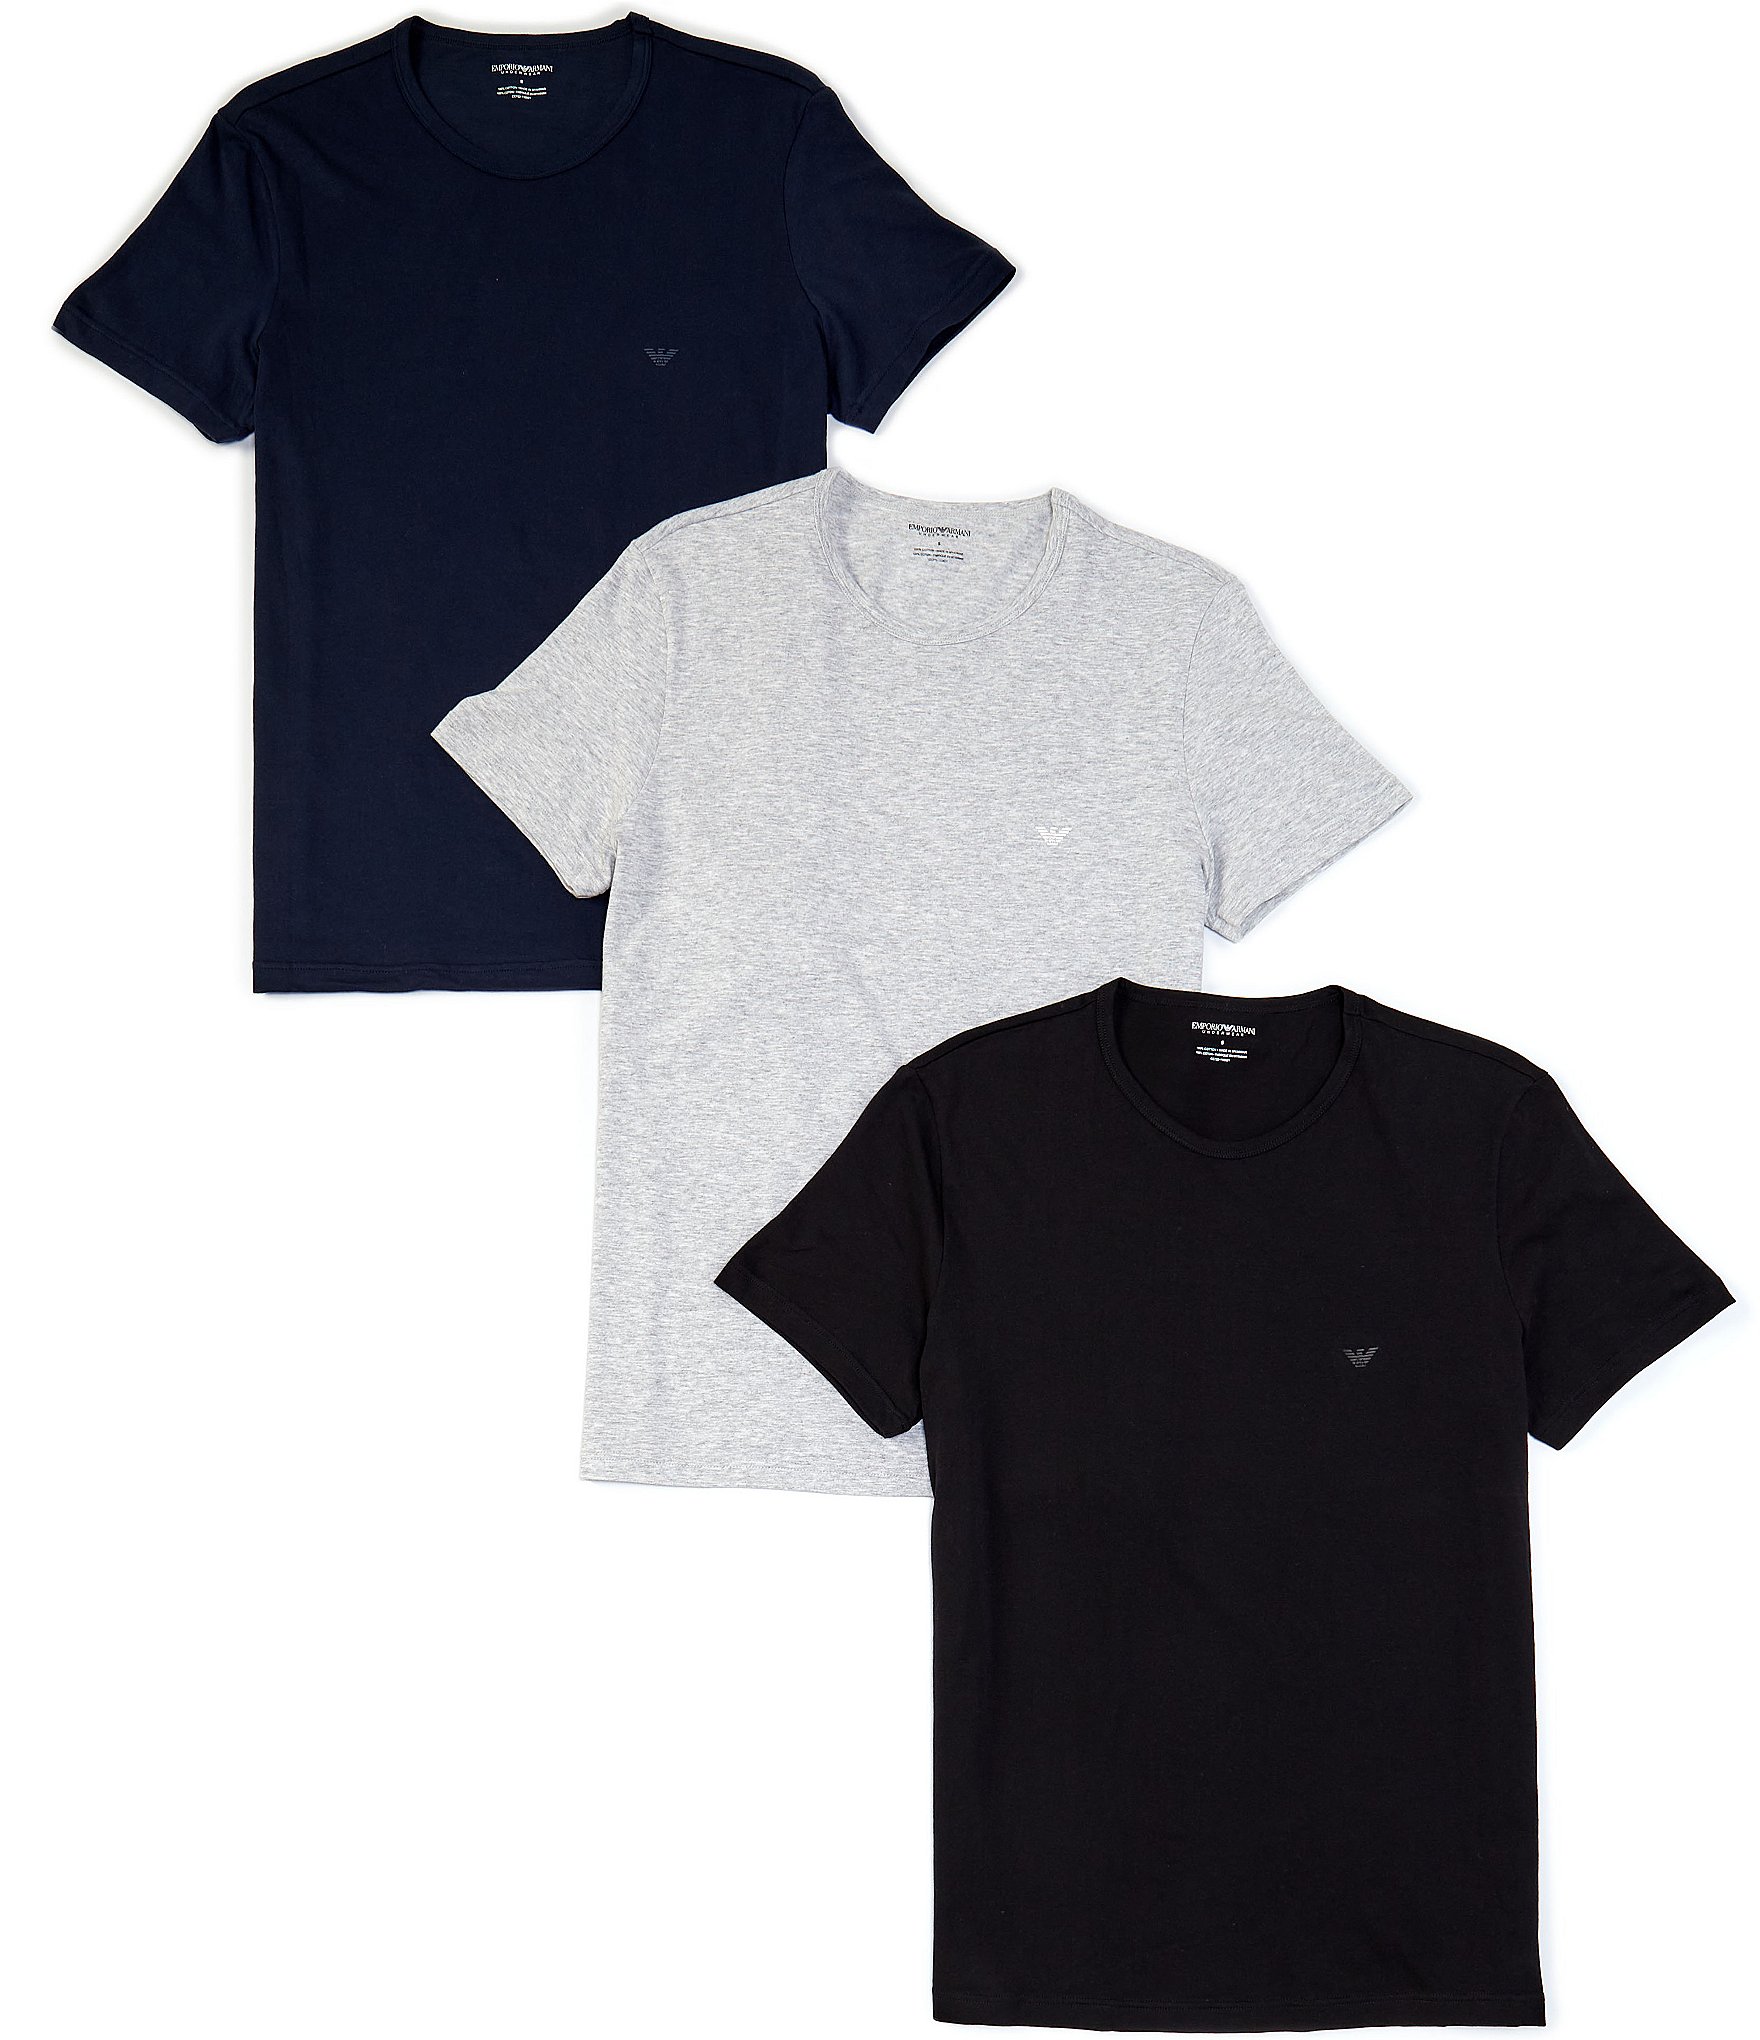 Thin-strap white camisoles 3-pack, Emporio Armani, Shop Men's Tank Tops,  T-Shirts & Undershirts Online